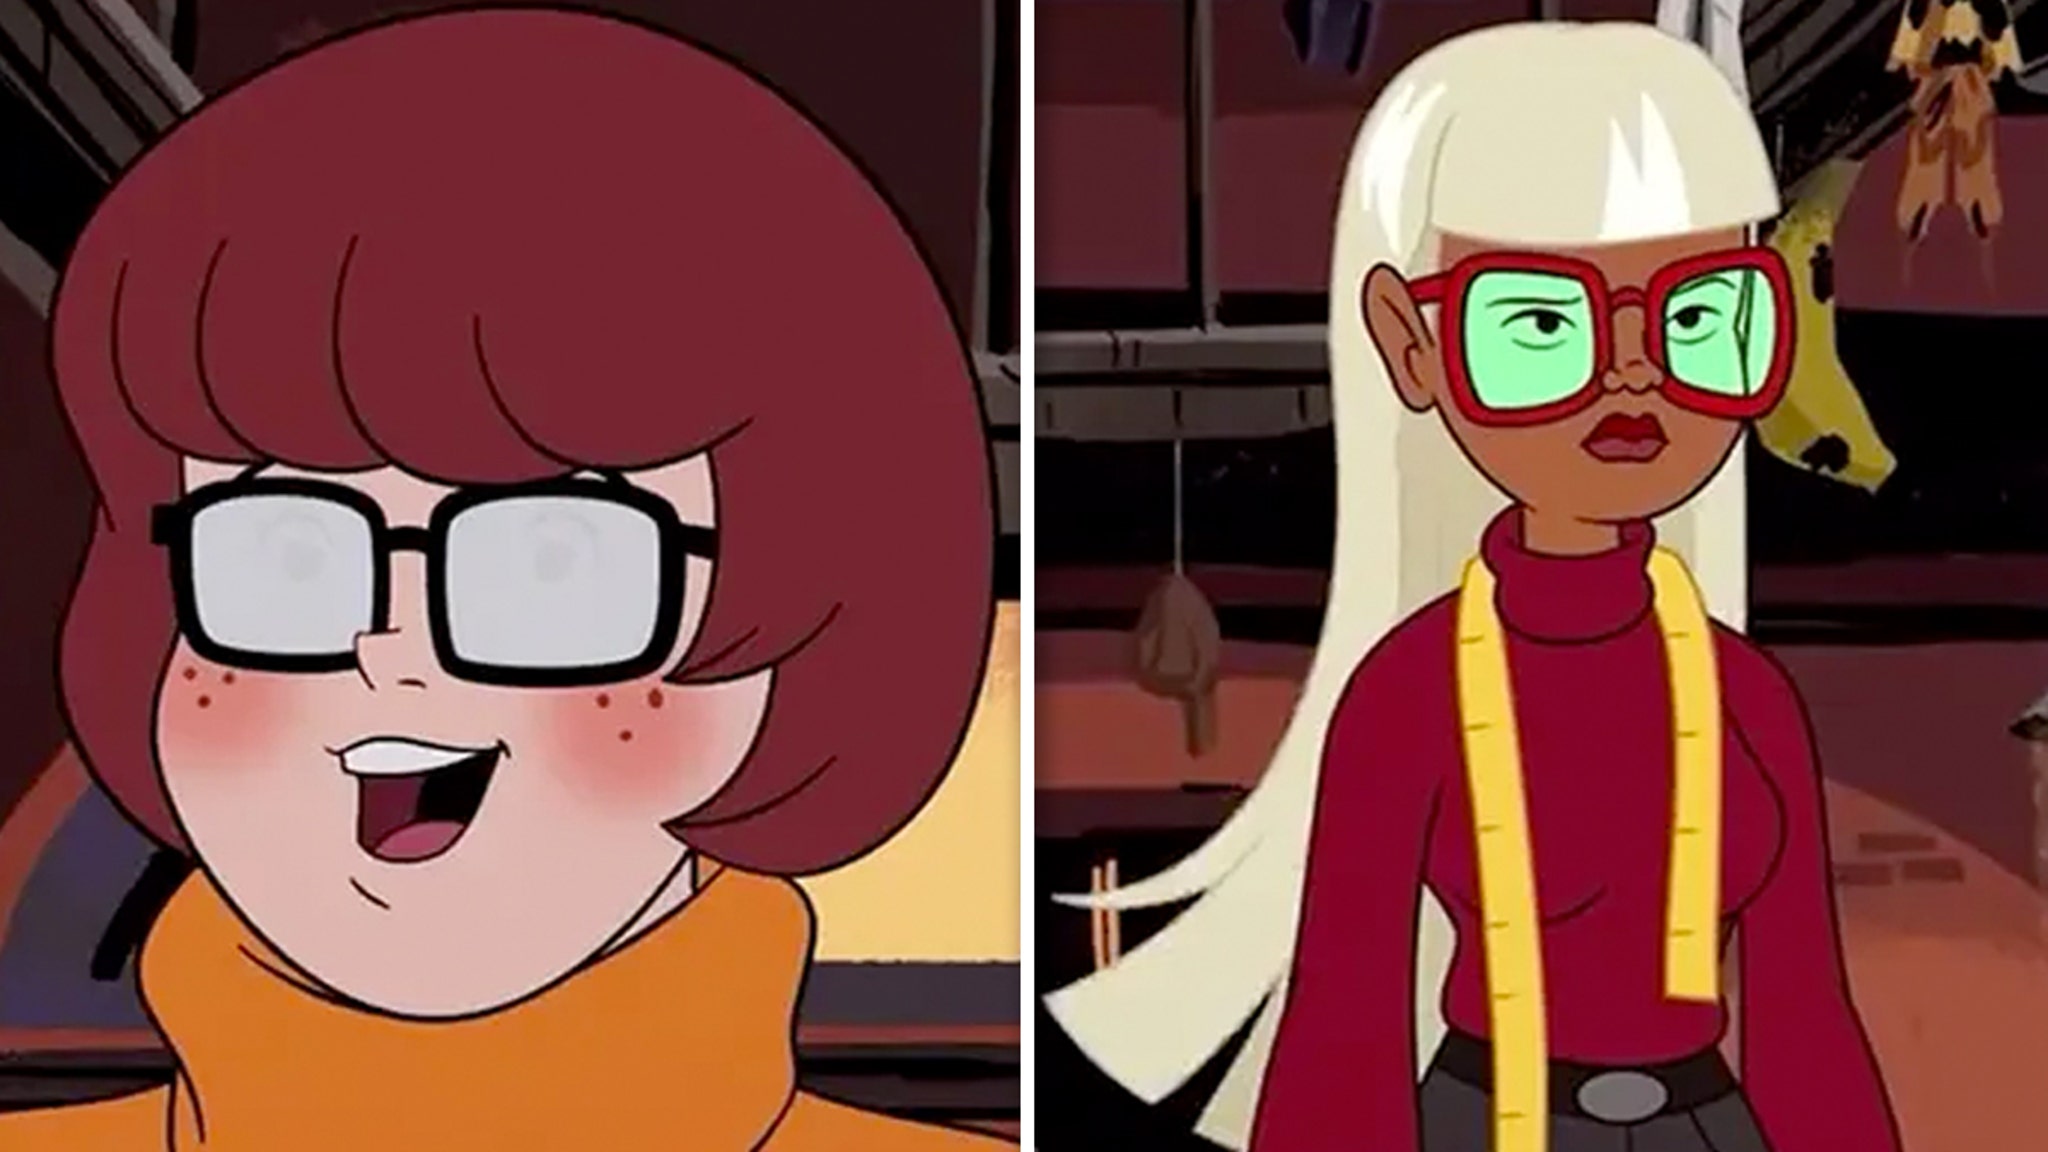 'Scooby-Doo' Star Velma Confirmed as Lesbian in New Animated Movie